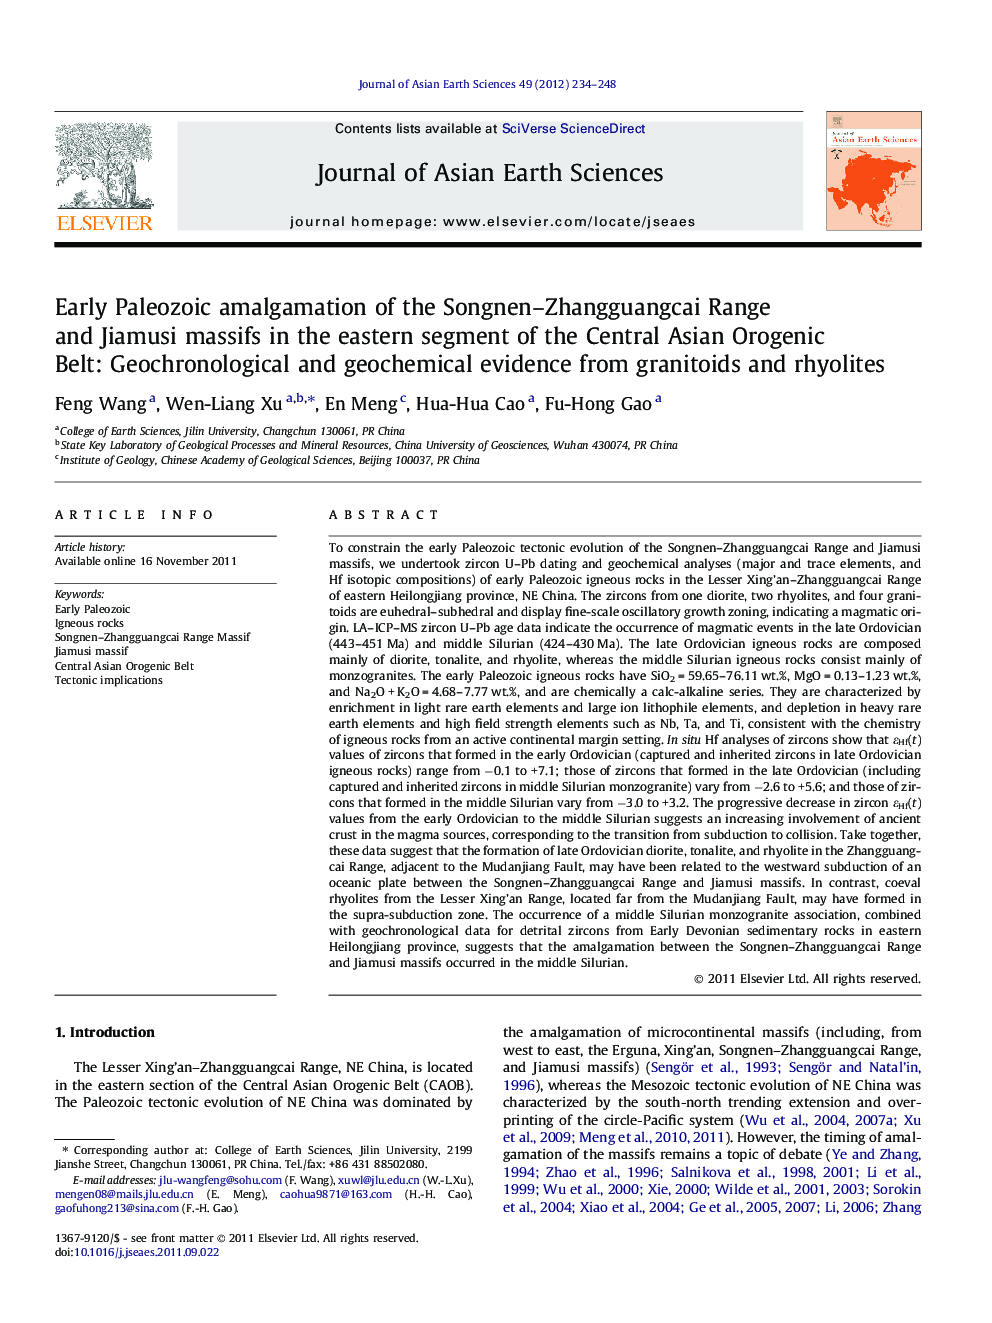 Early Paleozoic amalgamation of the Songnen–Zhangguangcai Range and Jiamusi massifs in the eastern segment of the Central Asian Orogenic Belt: Geochronological and geochemical evidence from granitoids and rhyolites